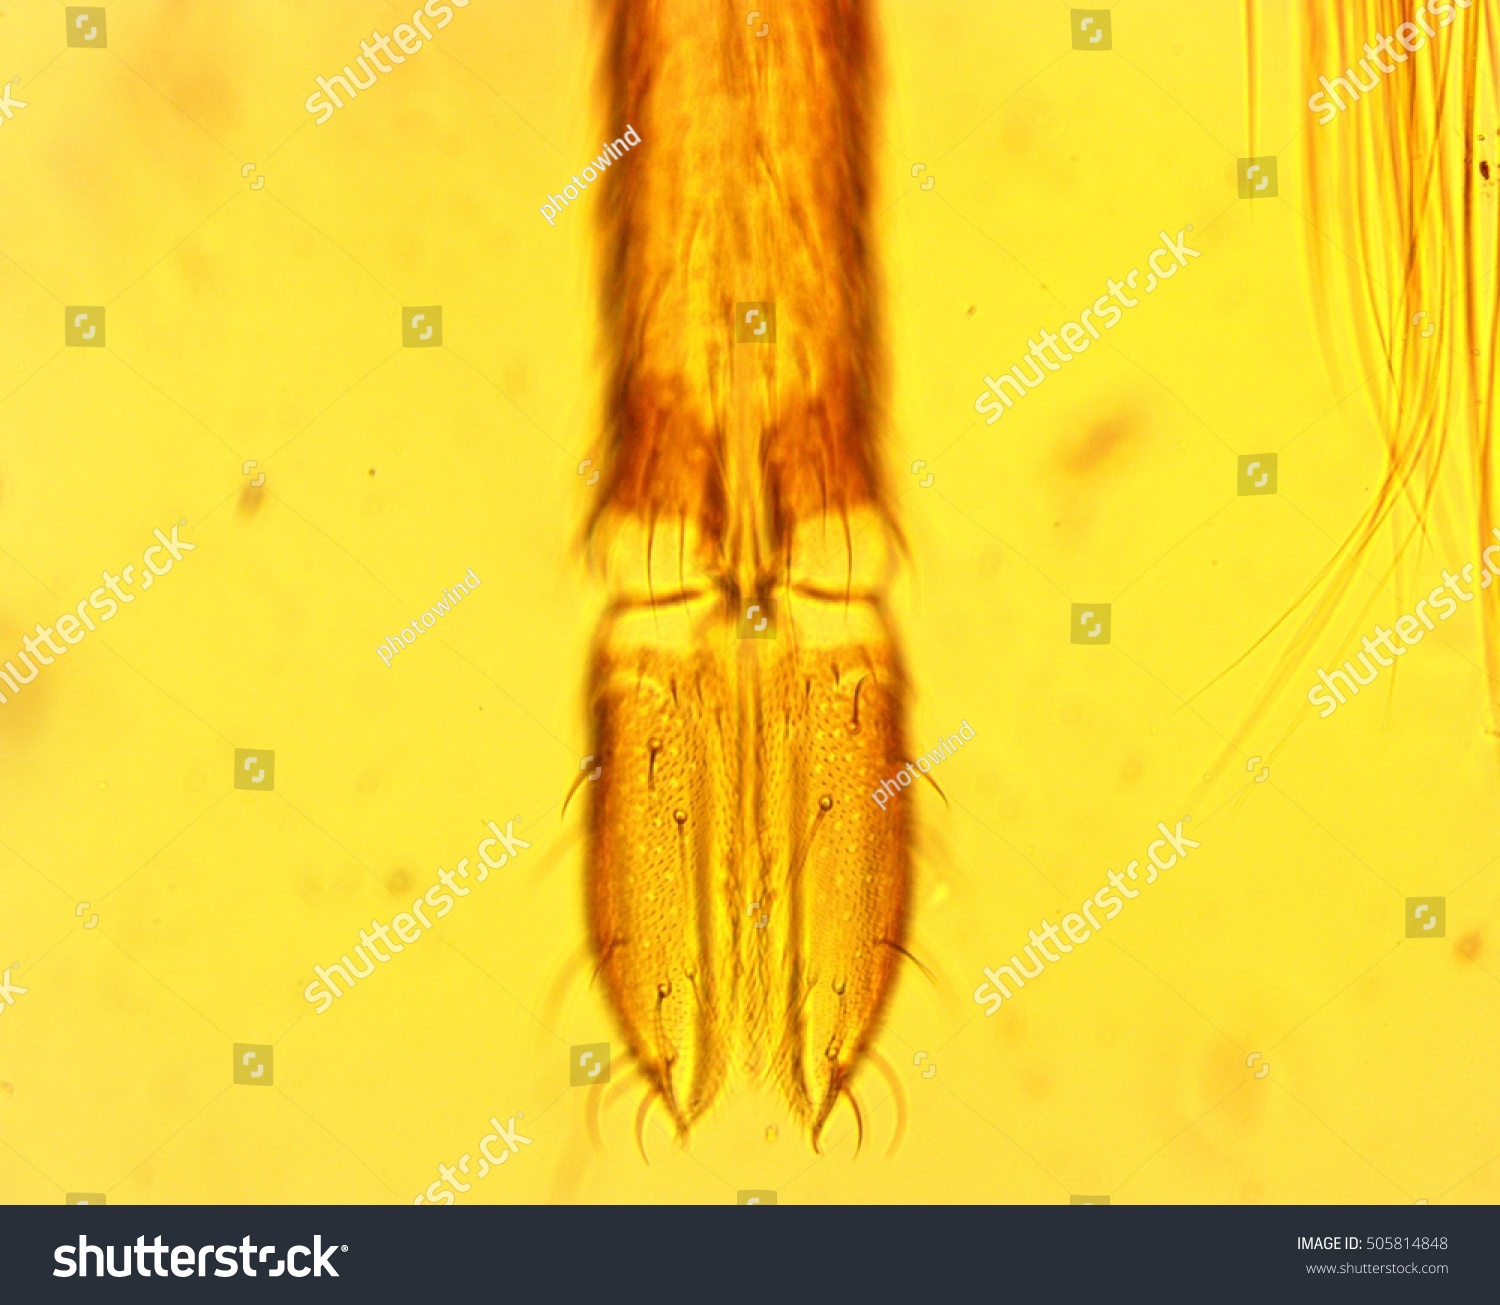 Anopheles mosquito (Anopheles sp.) proboscis - permanent slide plate under high magnification #505814848